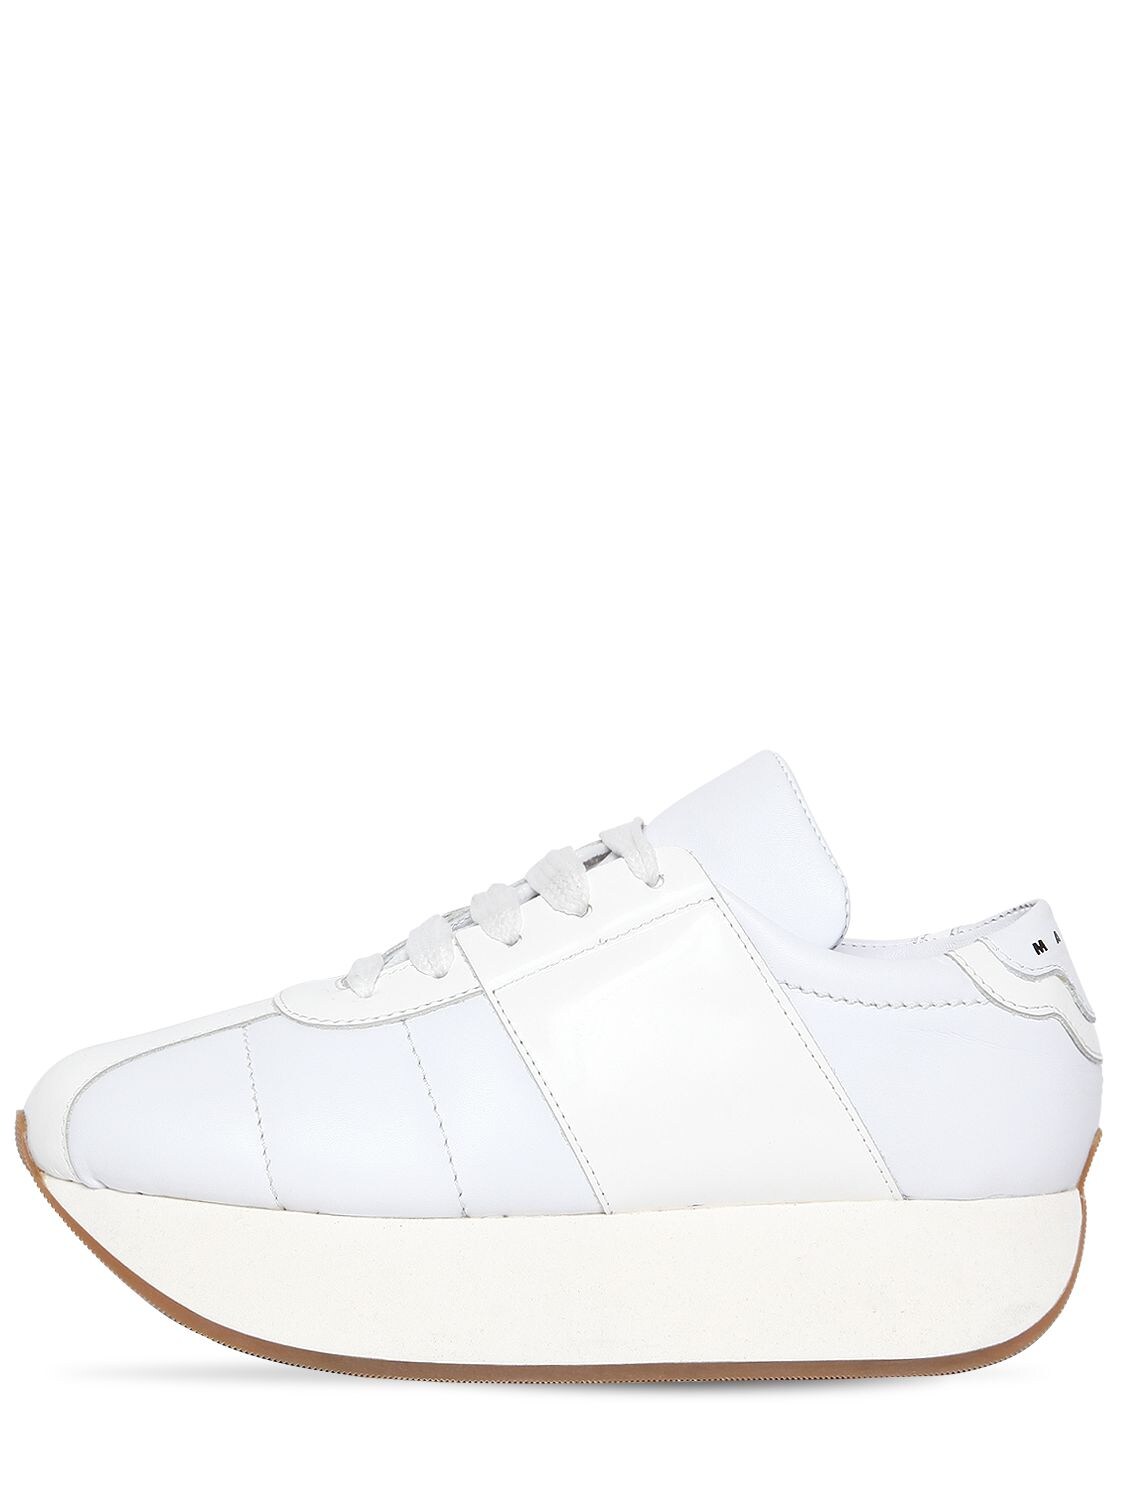 Marni 40mm Leather Platform Sneakers In White